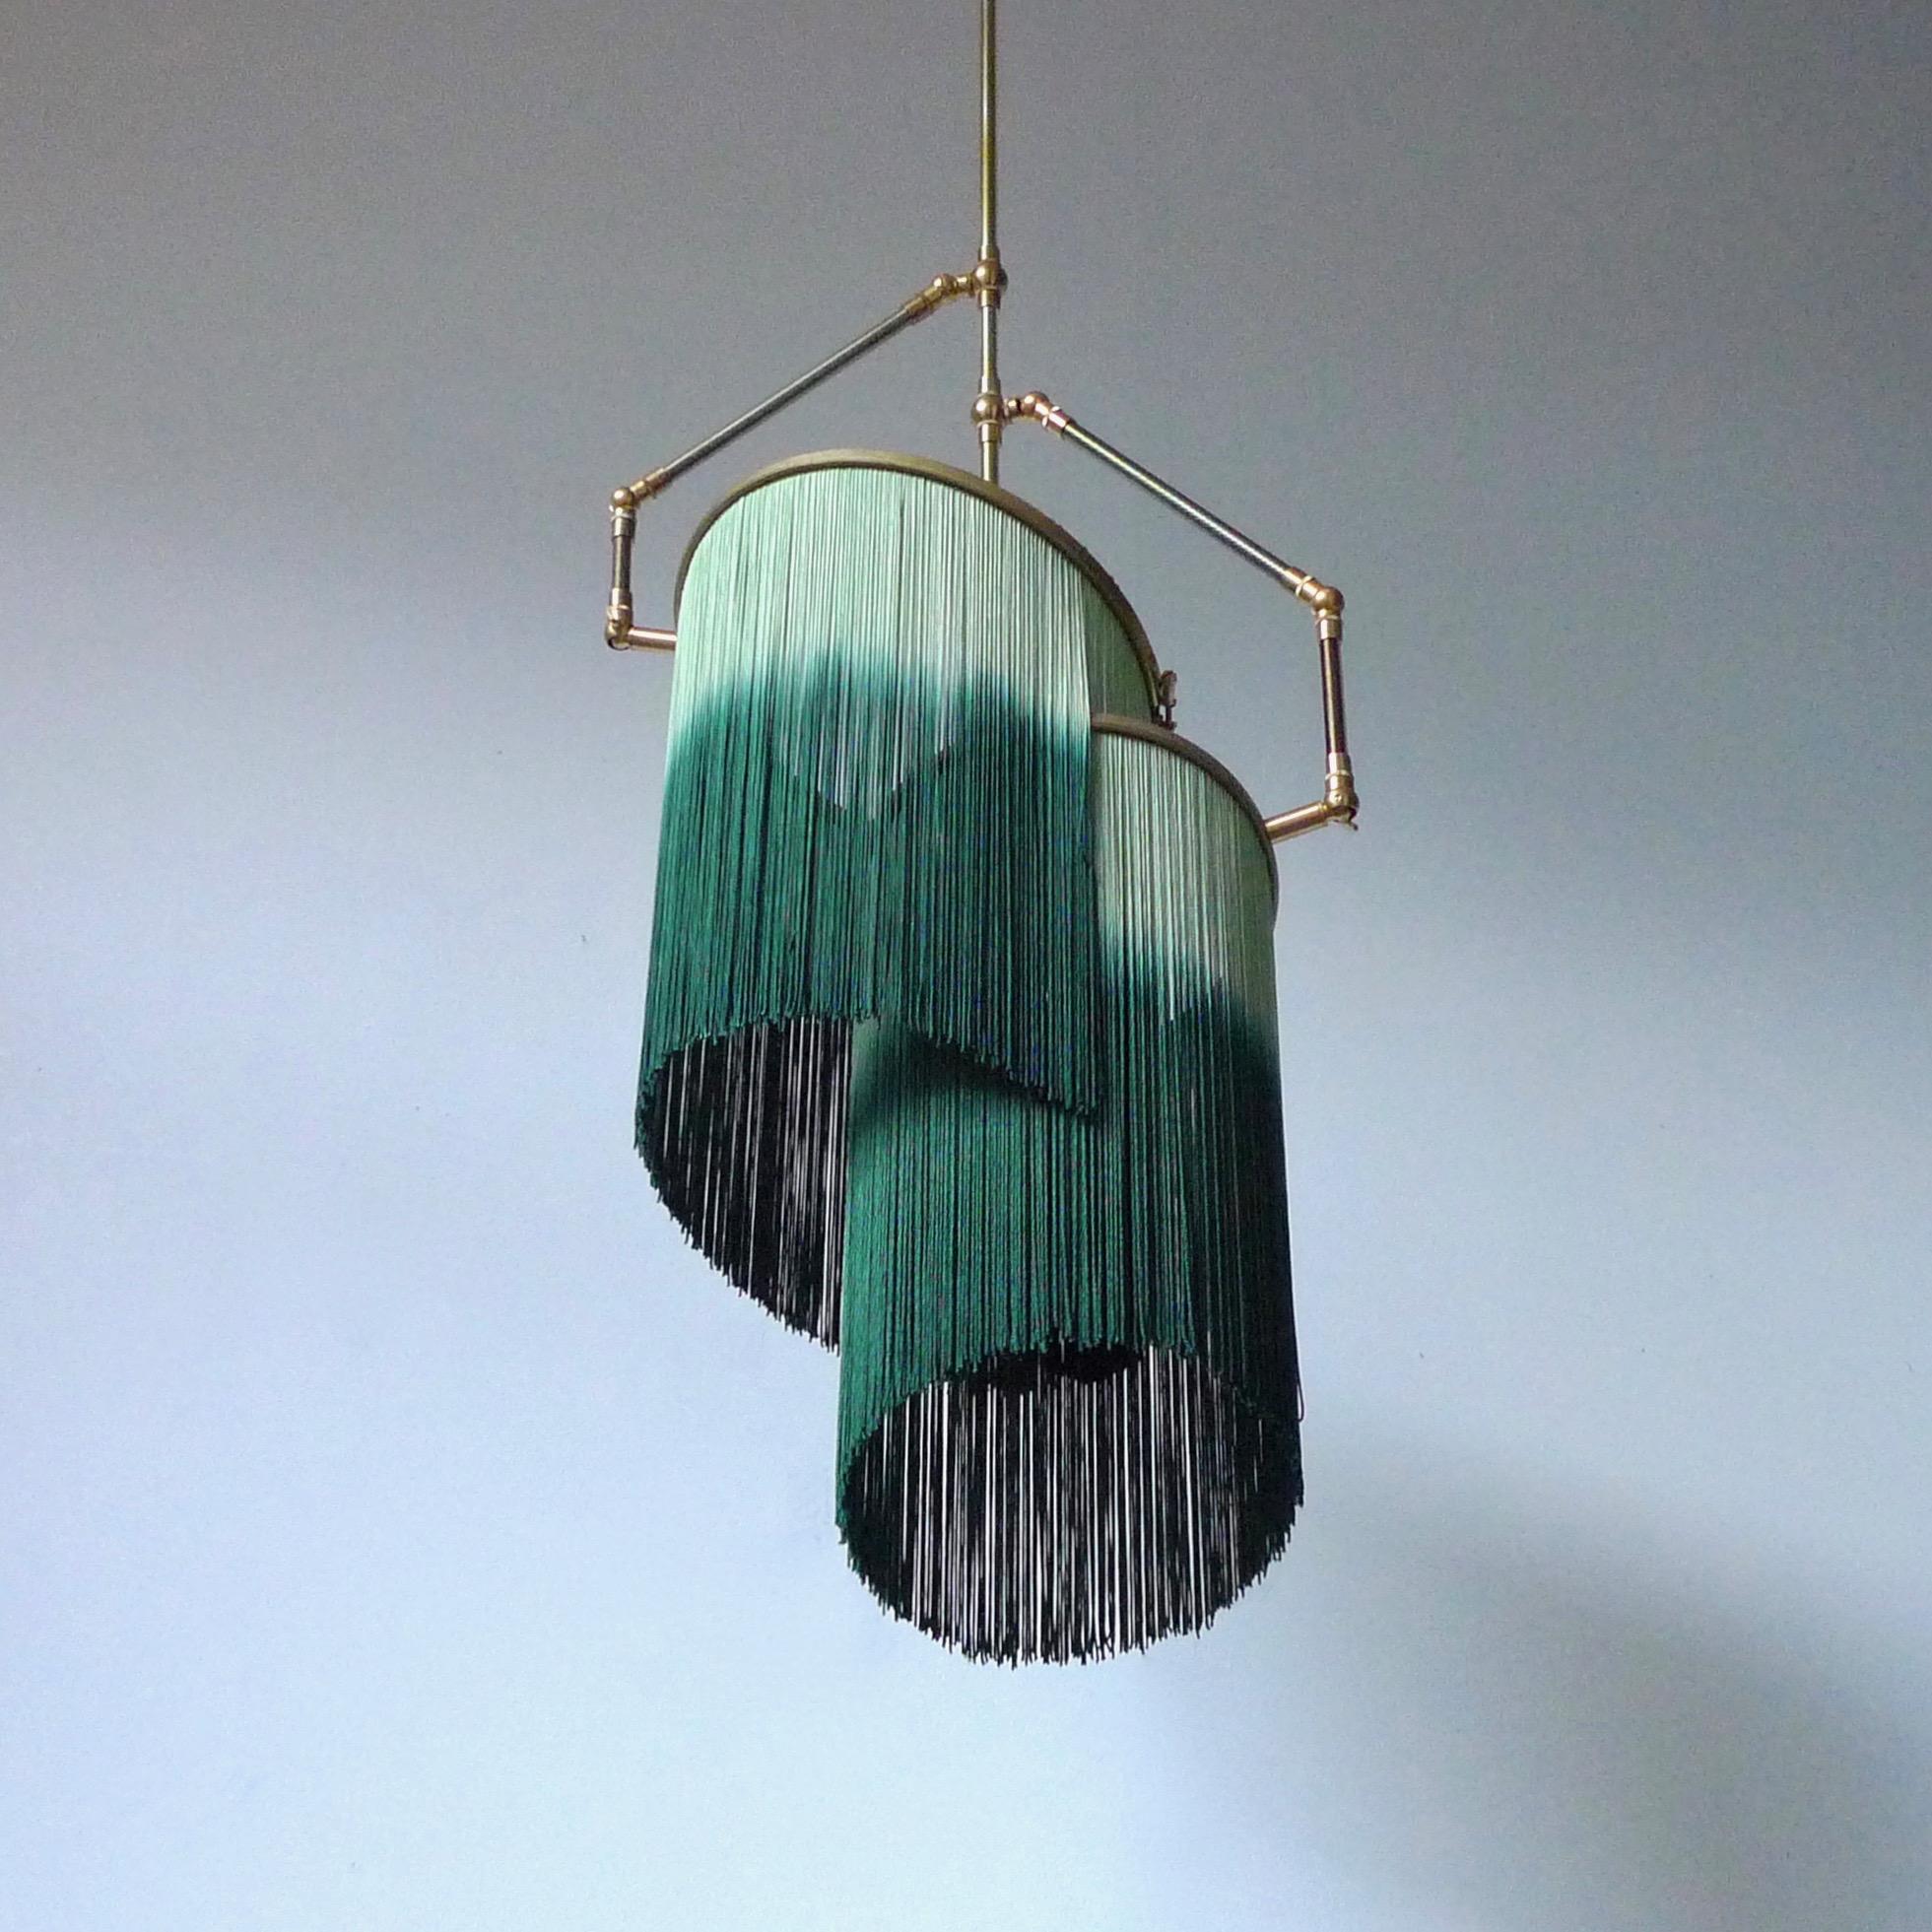 Green charme pendant lamp, Sander Bottinga

Dimensions: H 65 (can be customized) x W 38 x D 25 cm
Hand-Sculpted in brass, leather, wood and dip dyed colored Fringes in viscose.
The movable arms makes it possible to move the circles with fringes in